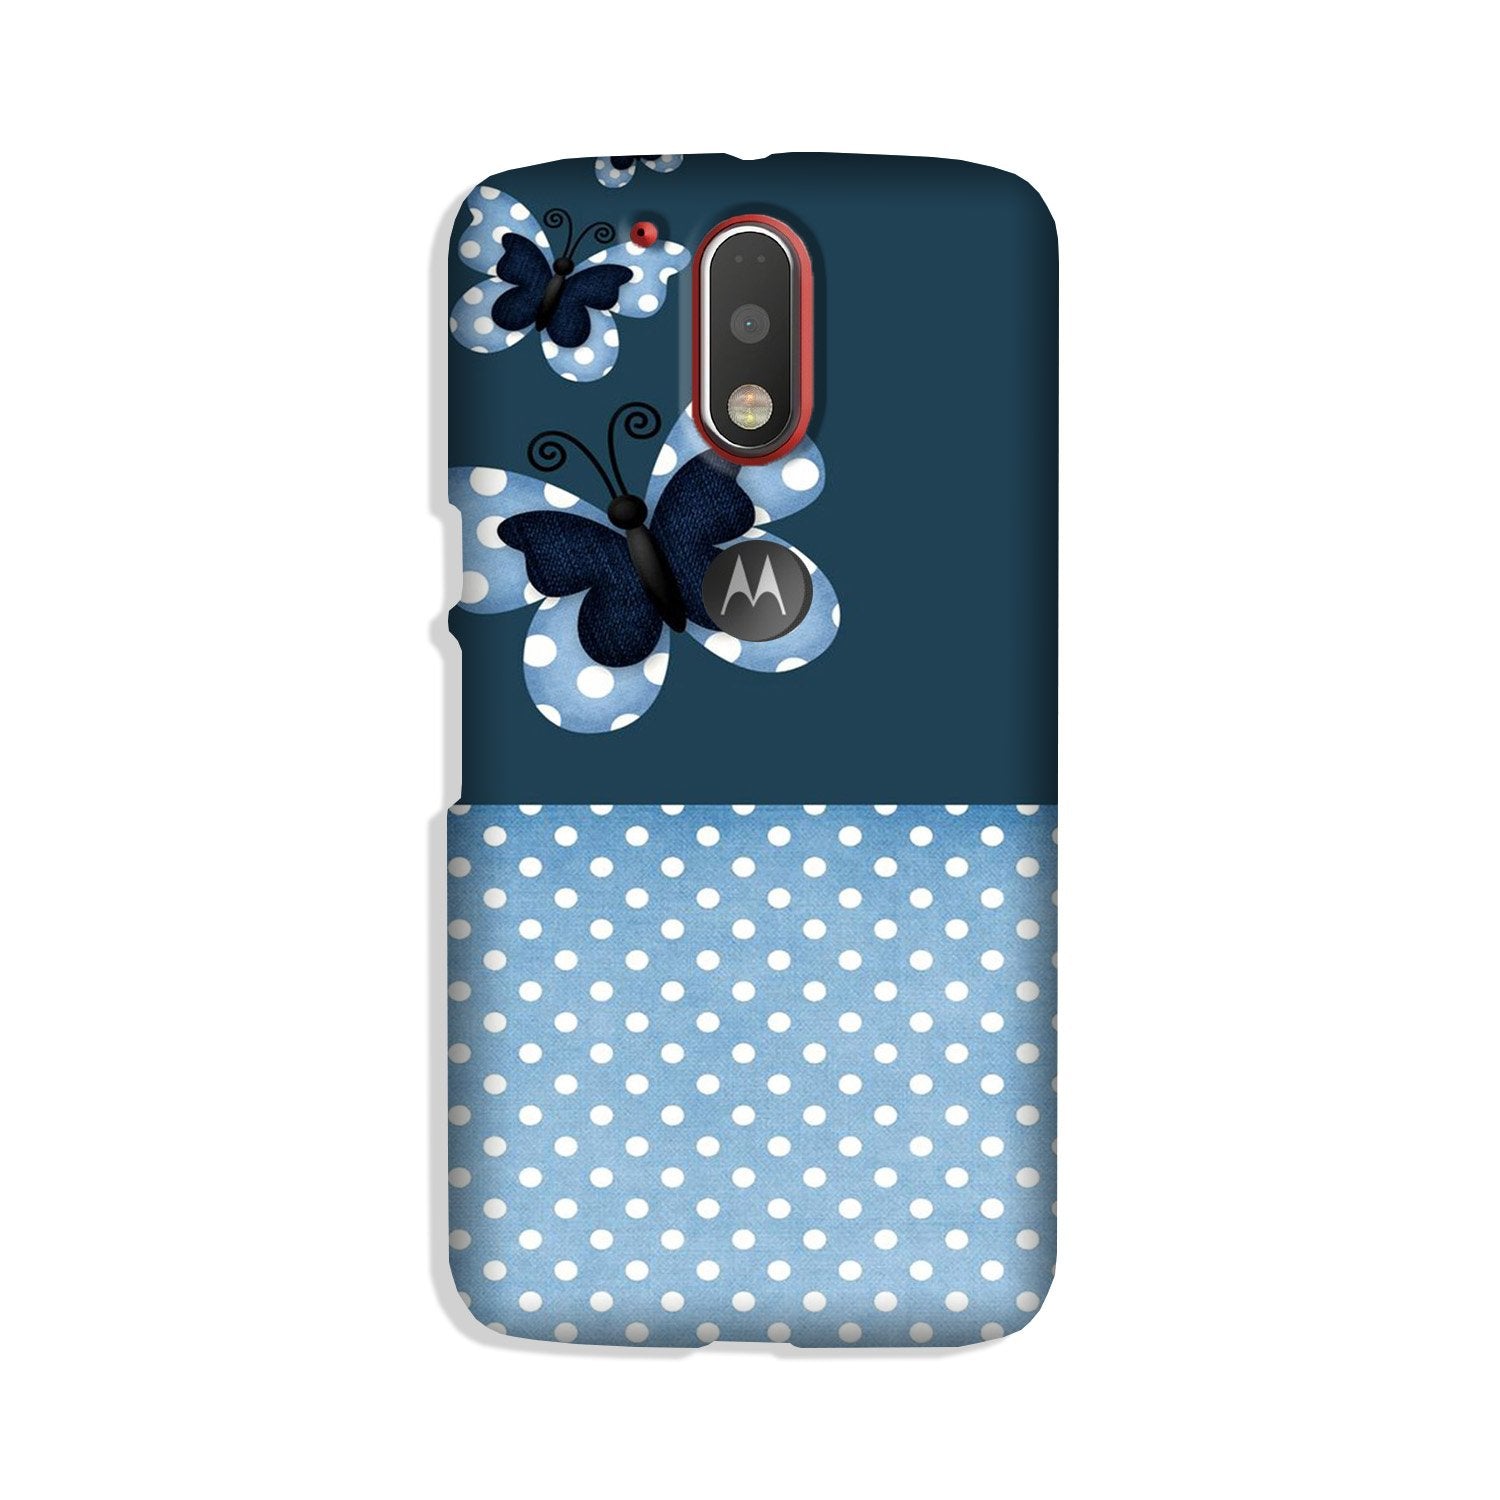 White dots Butterfly Case for Moto G4 Plus